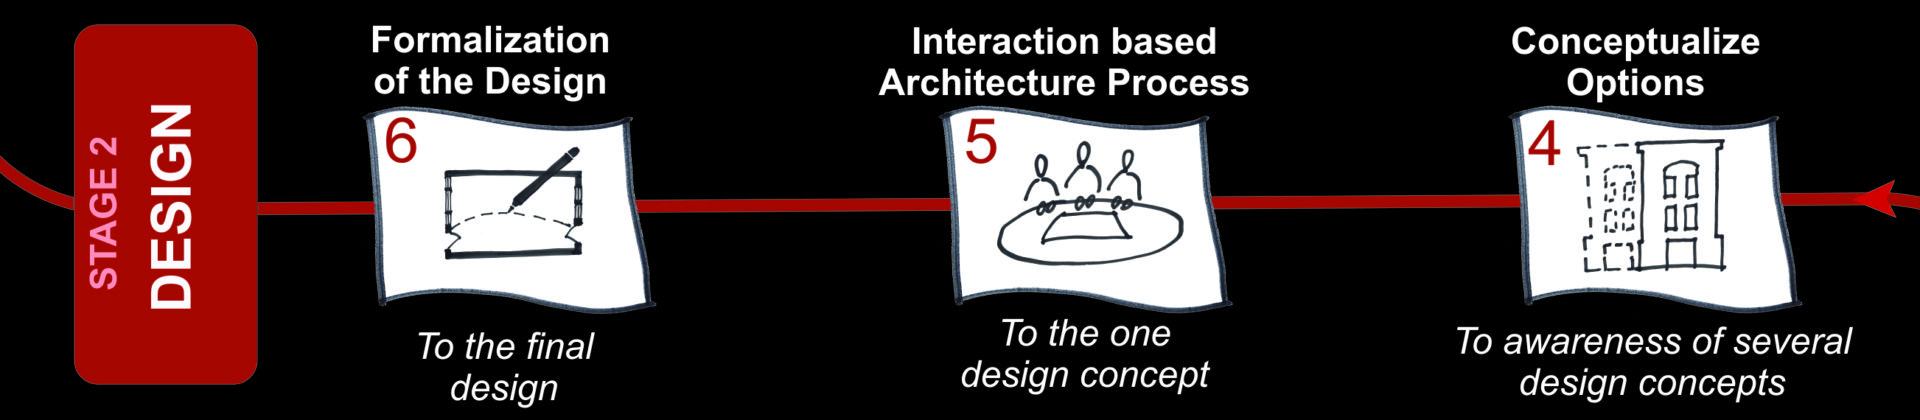 The process of Interactive Architecture